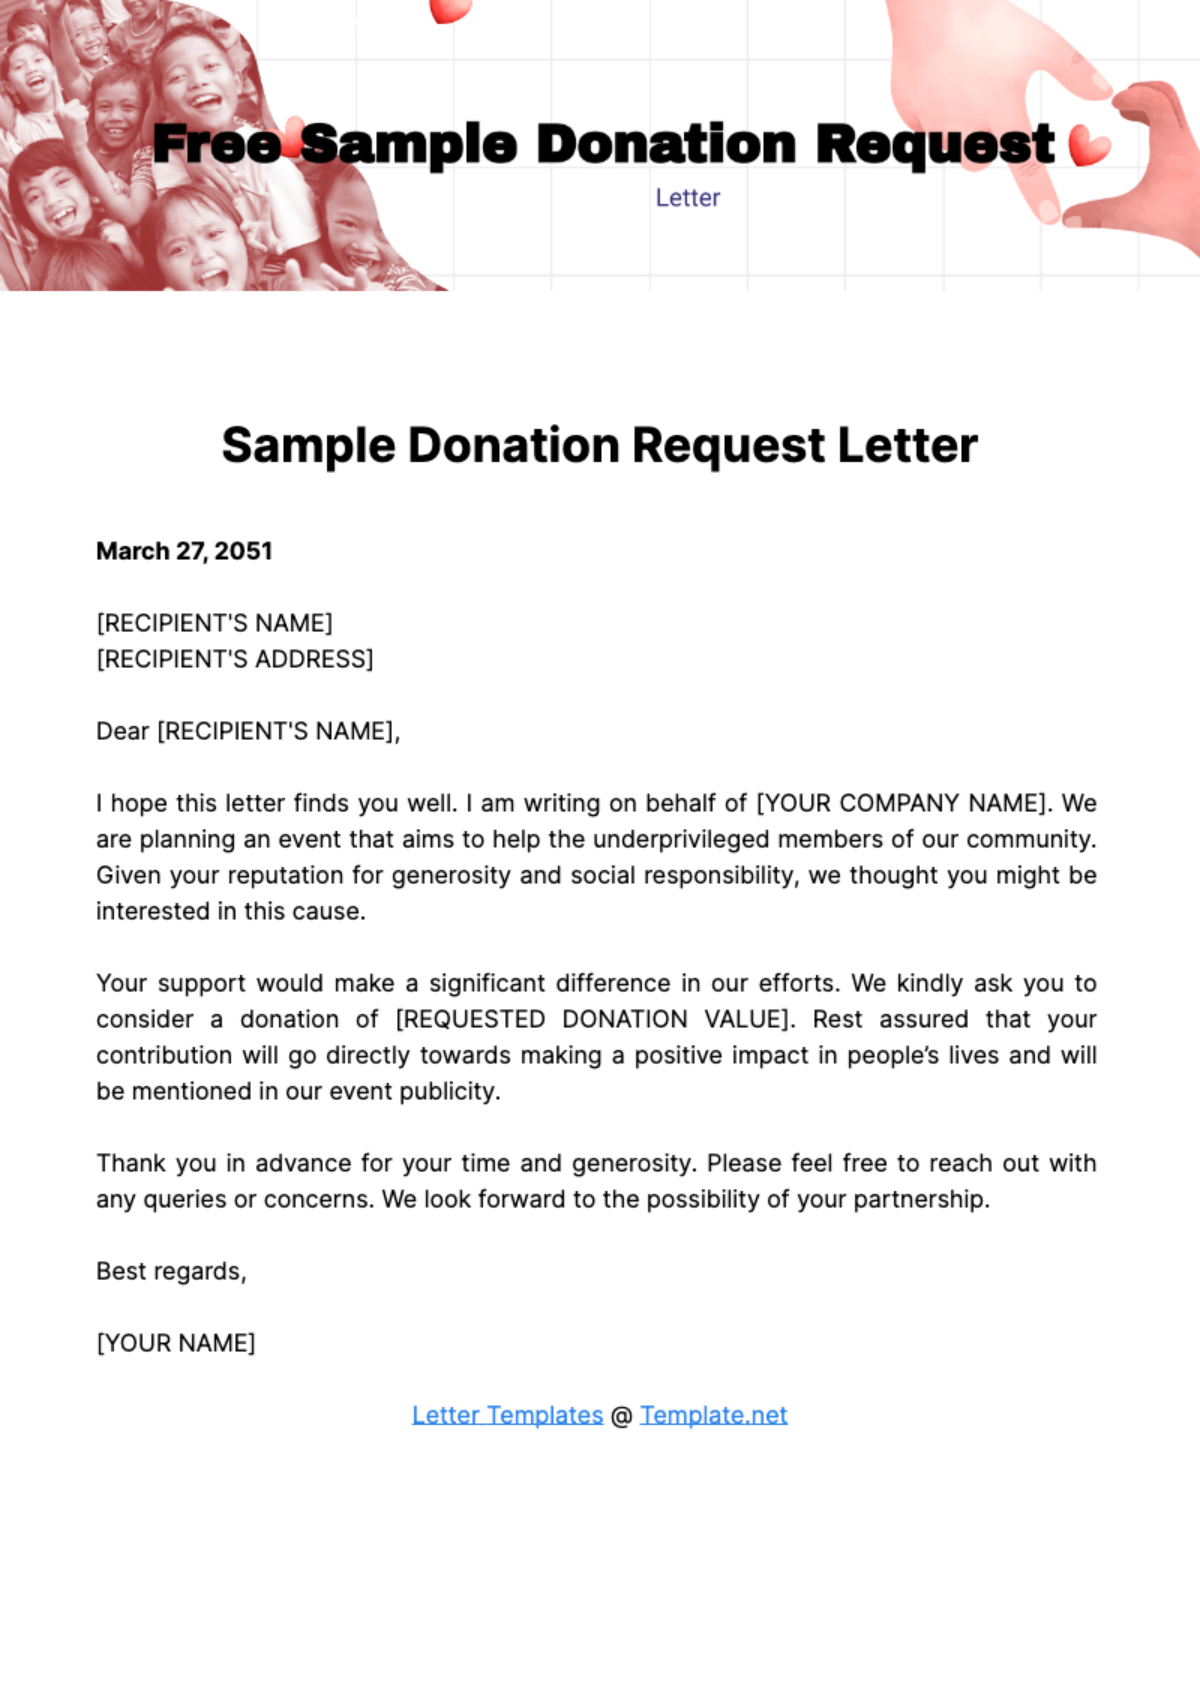 Sample Donation Request Letter Template